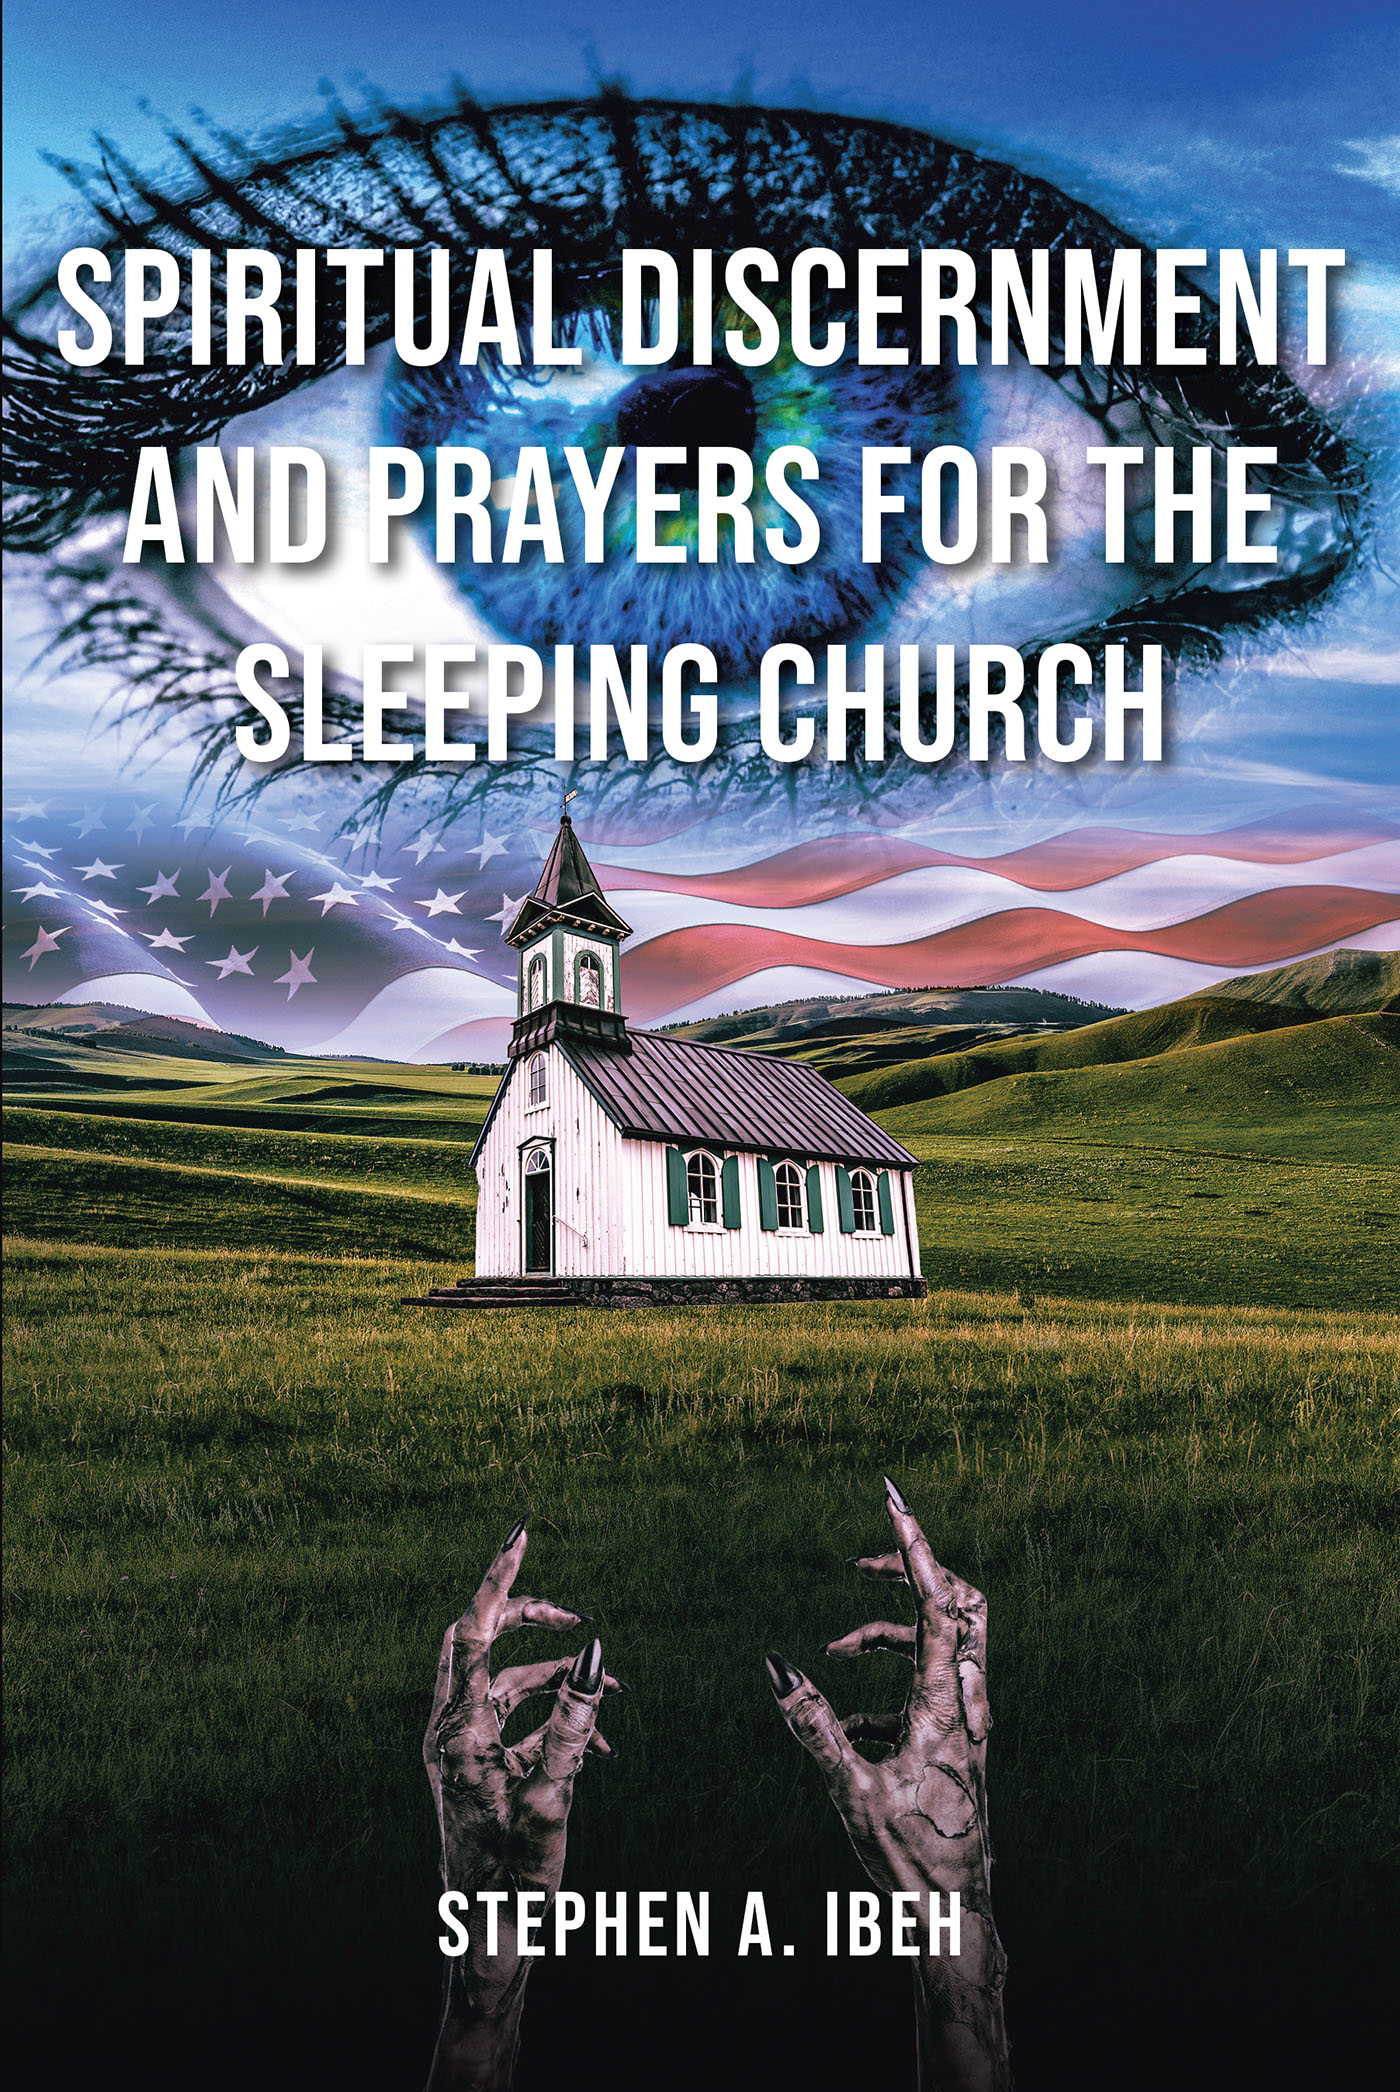 Stephen A. Ibeh’s Newly Released "Spiritual Discernment and Prayers for the Sleeping Church" is a Passionate Message to the Modern Church